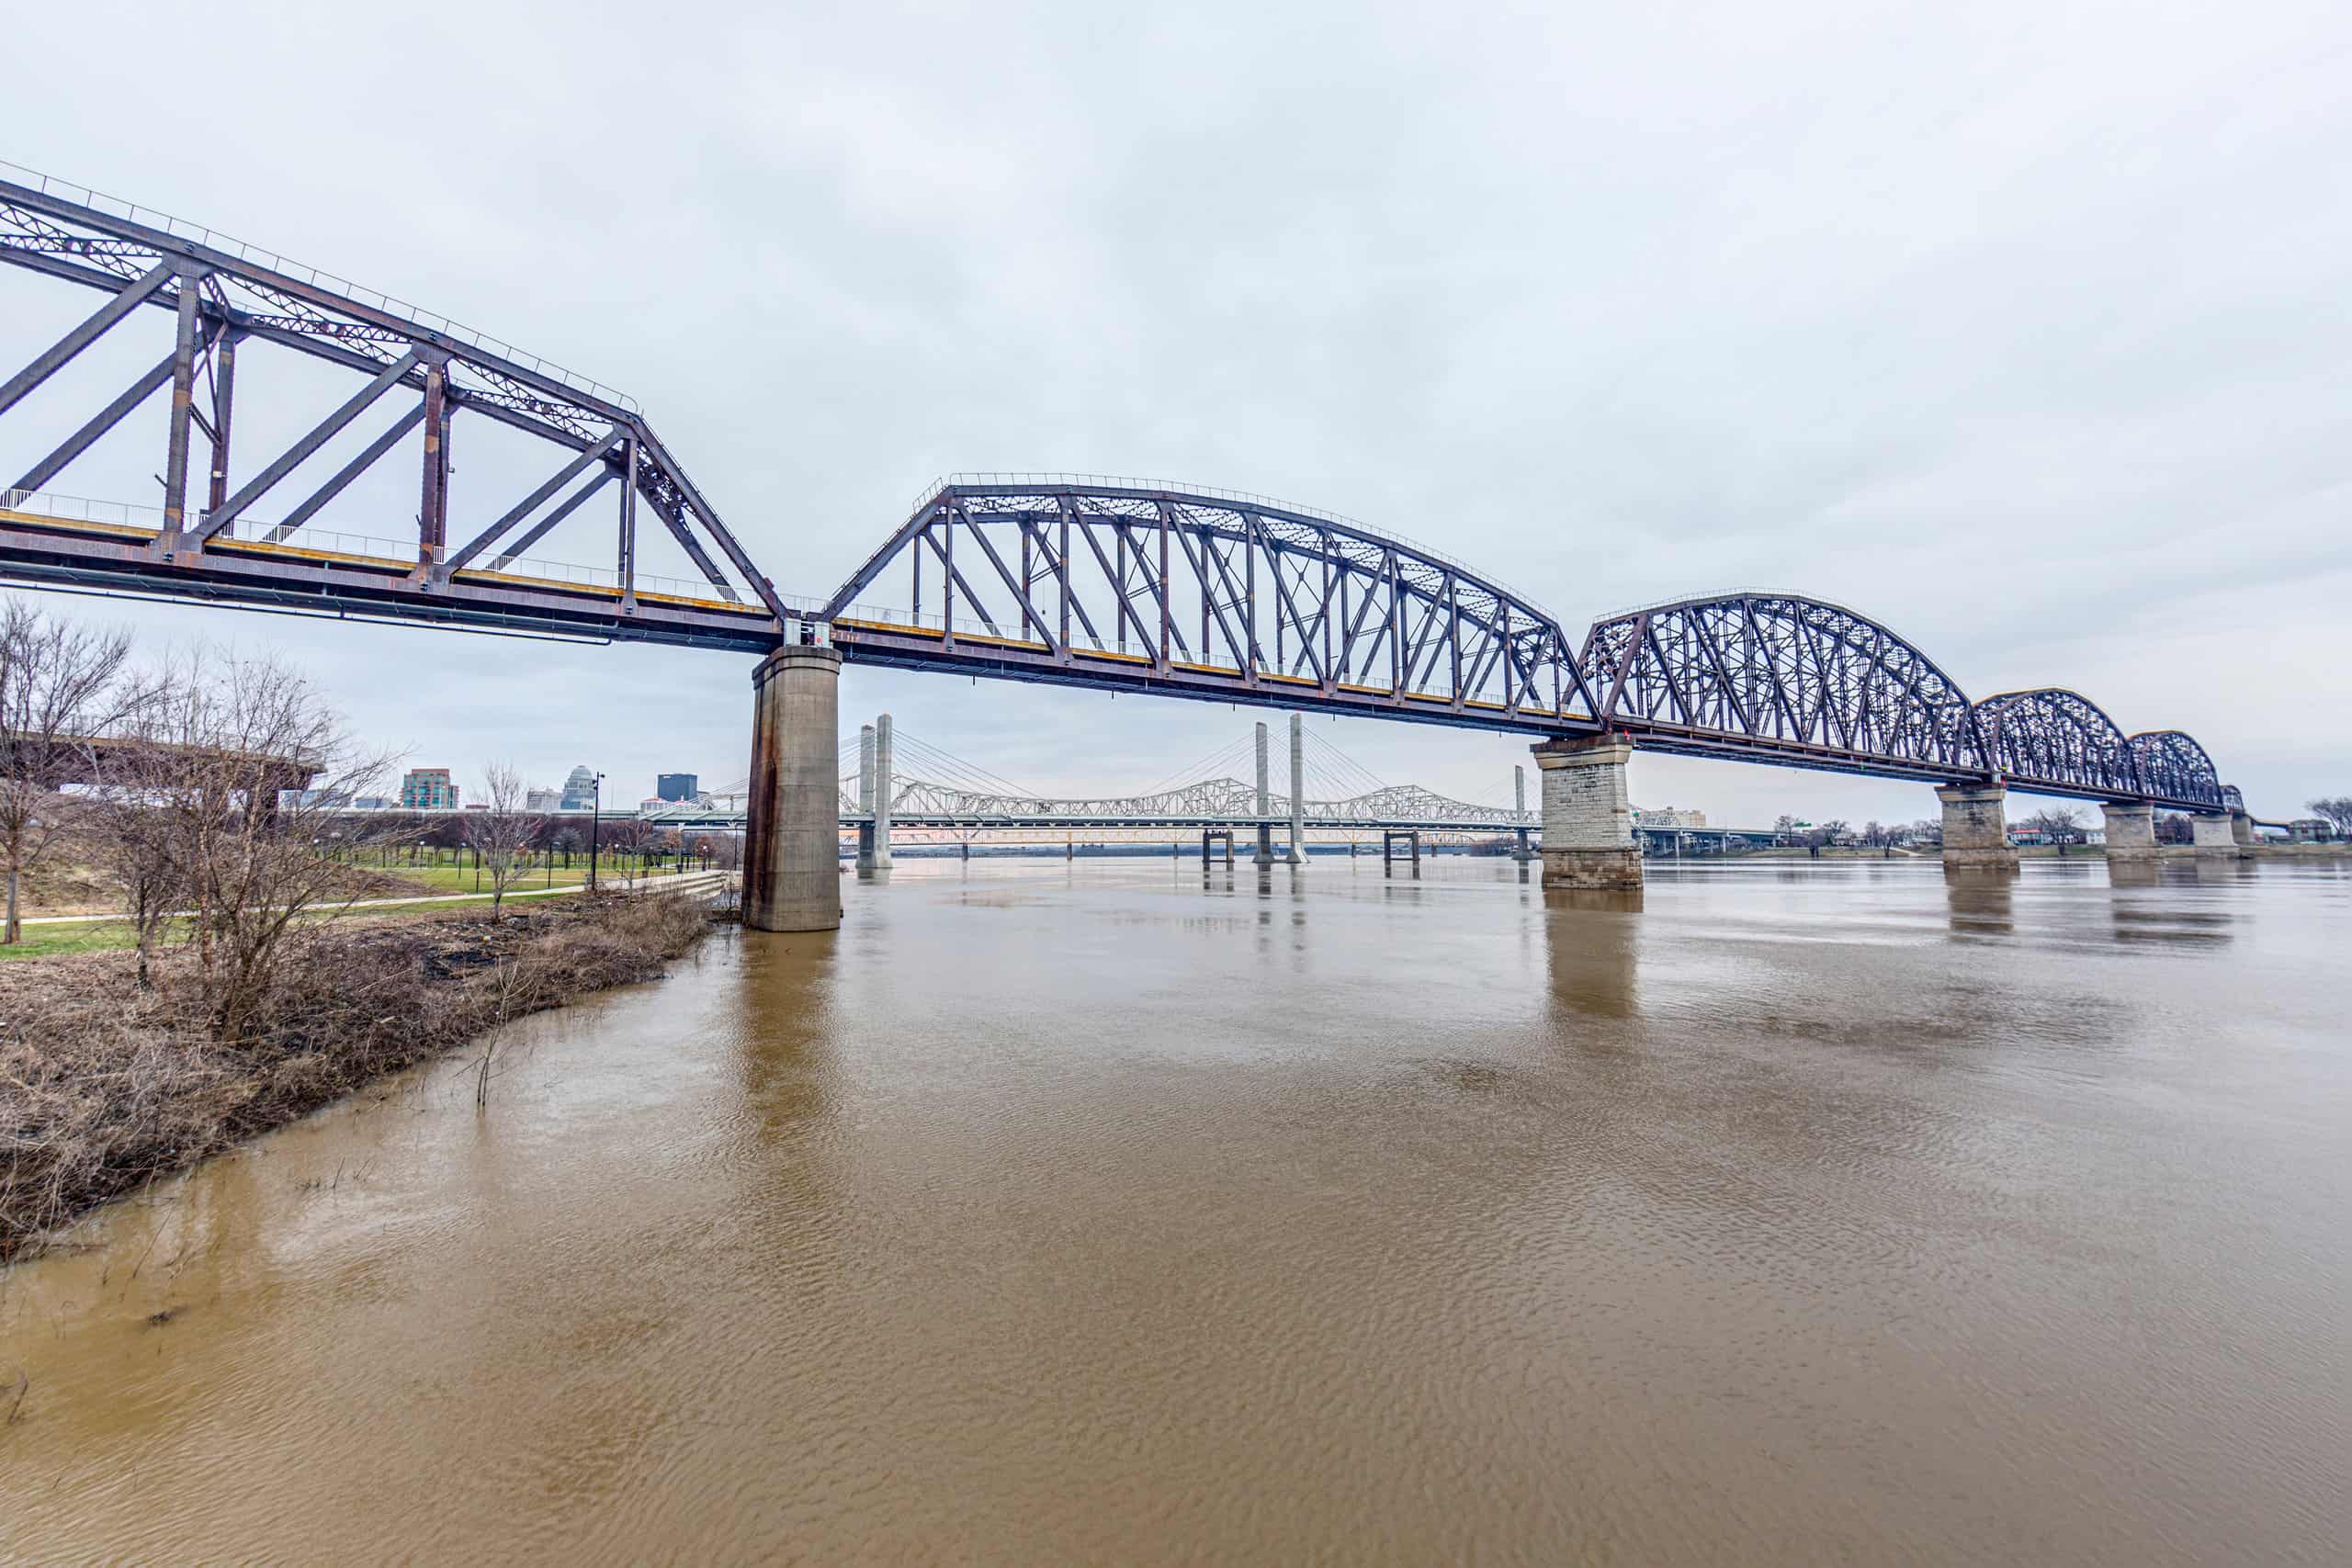 View of Big Four Bridge and Ohio river in Louisville at daytime.